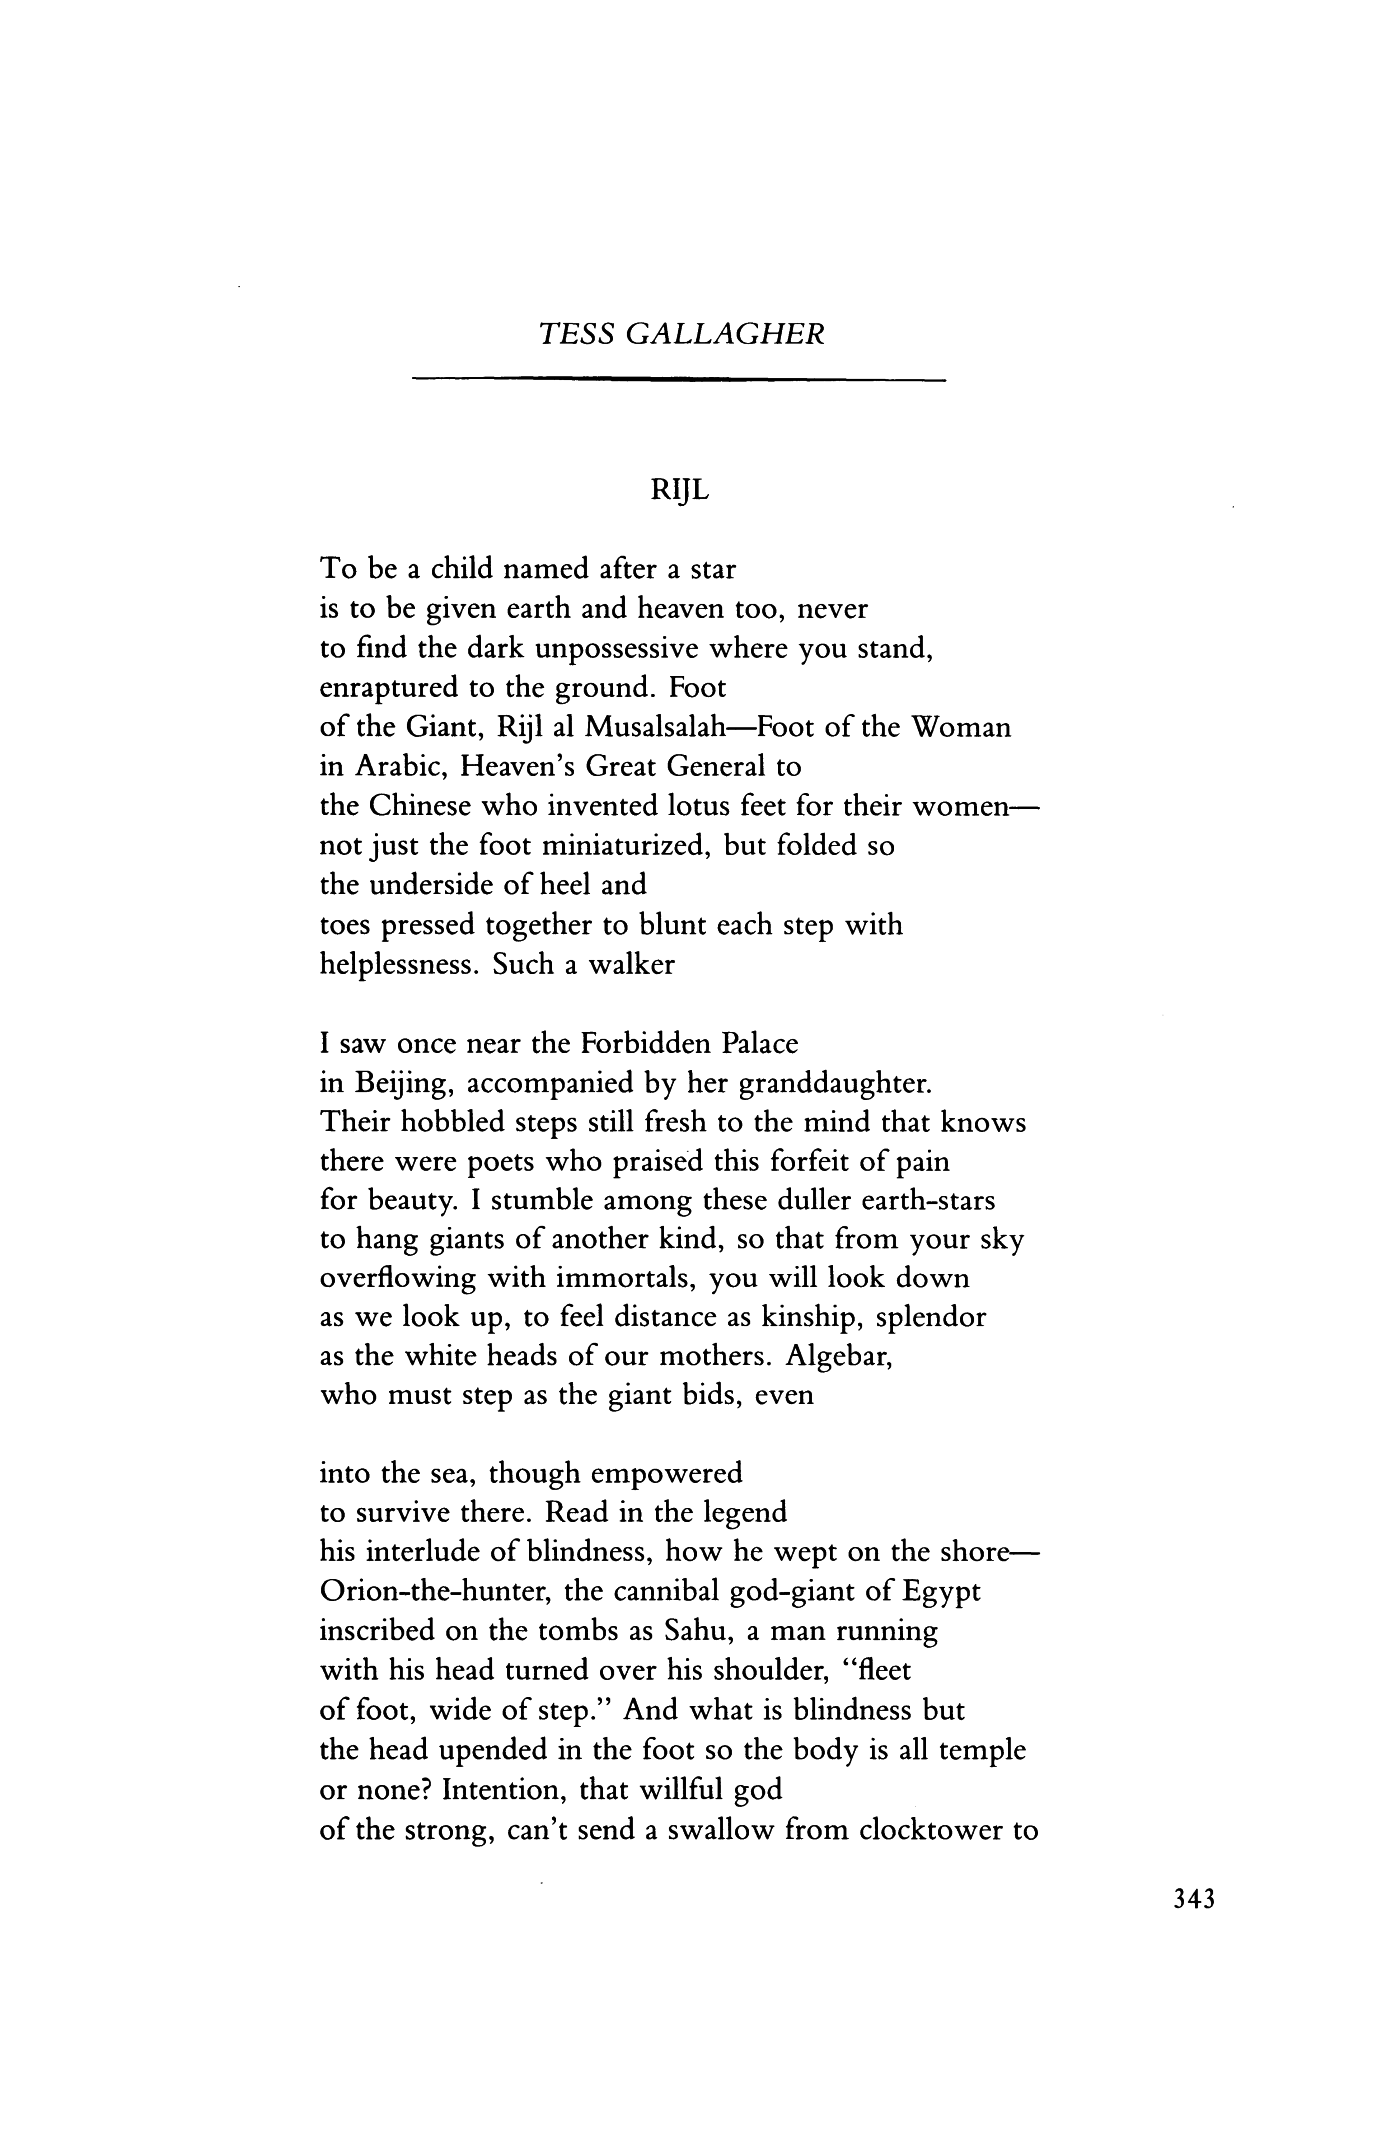 Close To Me Now - Tess Gallagher [POEM] : r/Poetry